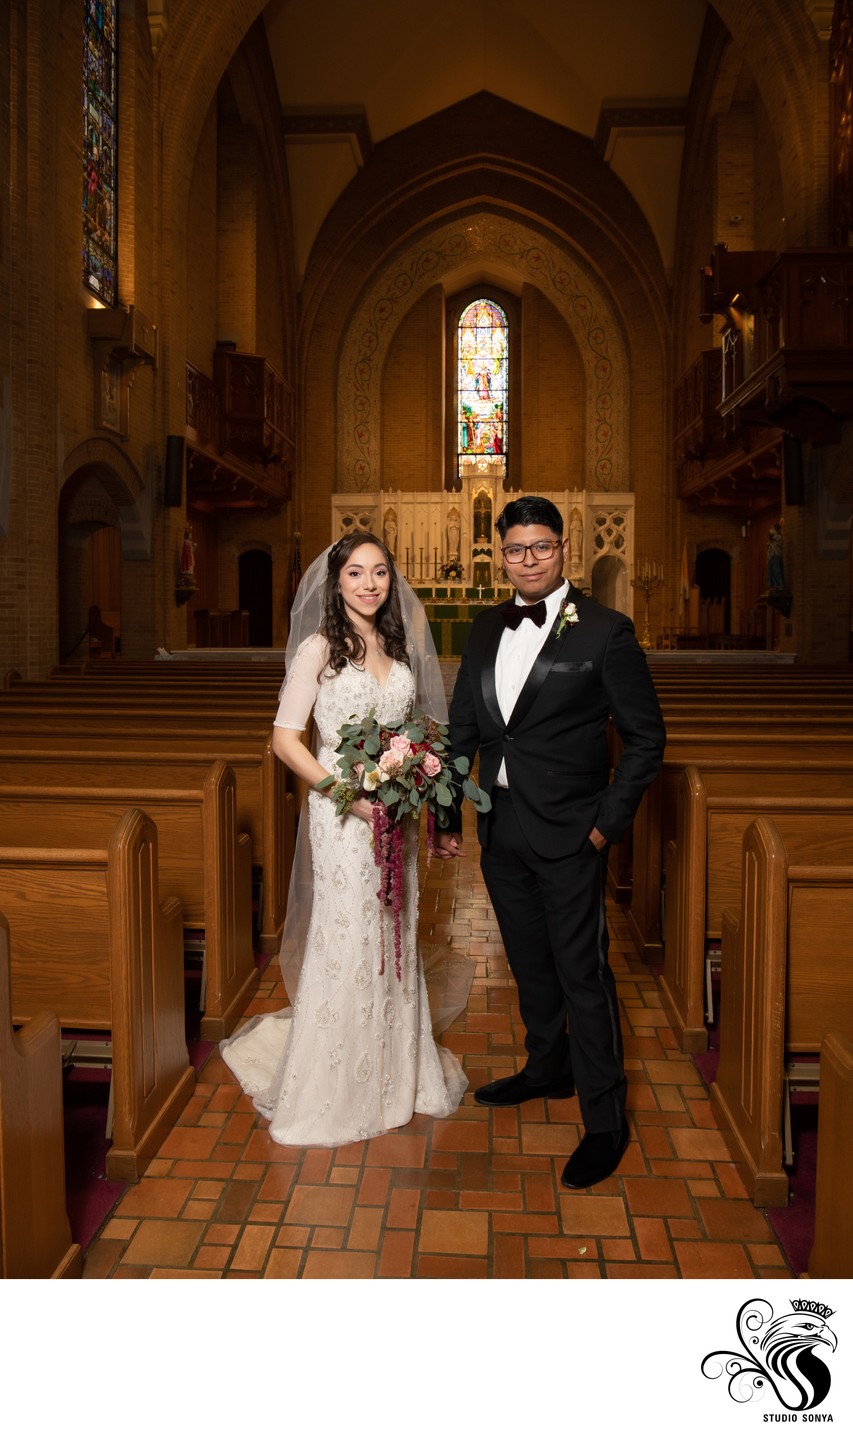 Bride and Groom at Our Lady of Grace Catholic Church in Greensboro